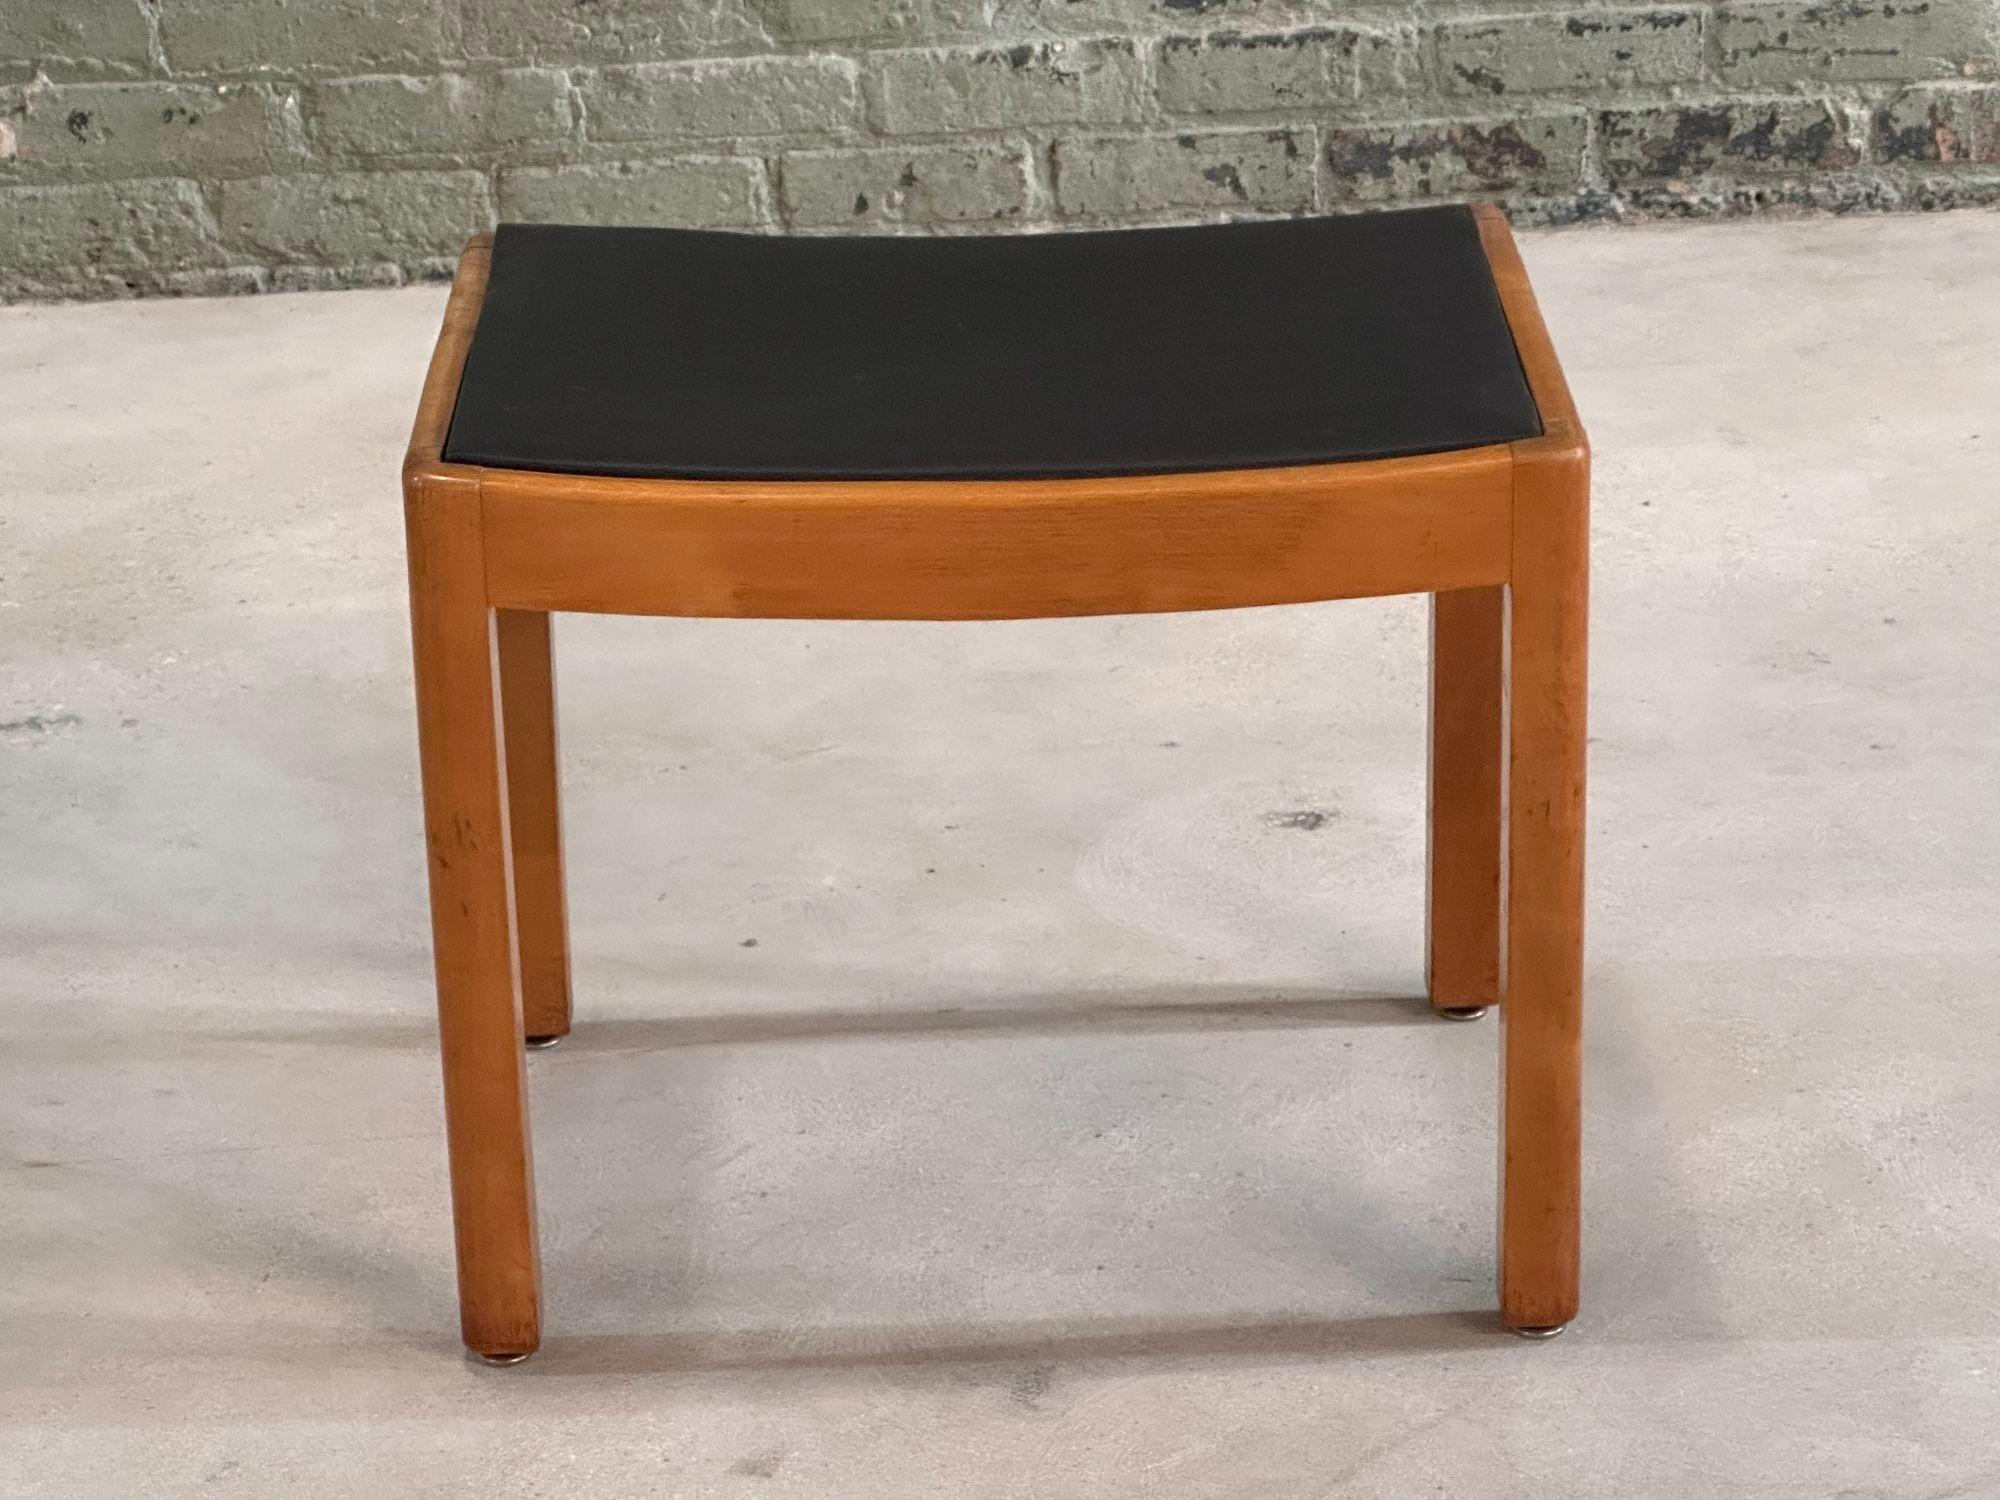 1930s French Art Deco Stool In Good Condition For Sale In Chicago, IL